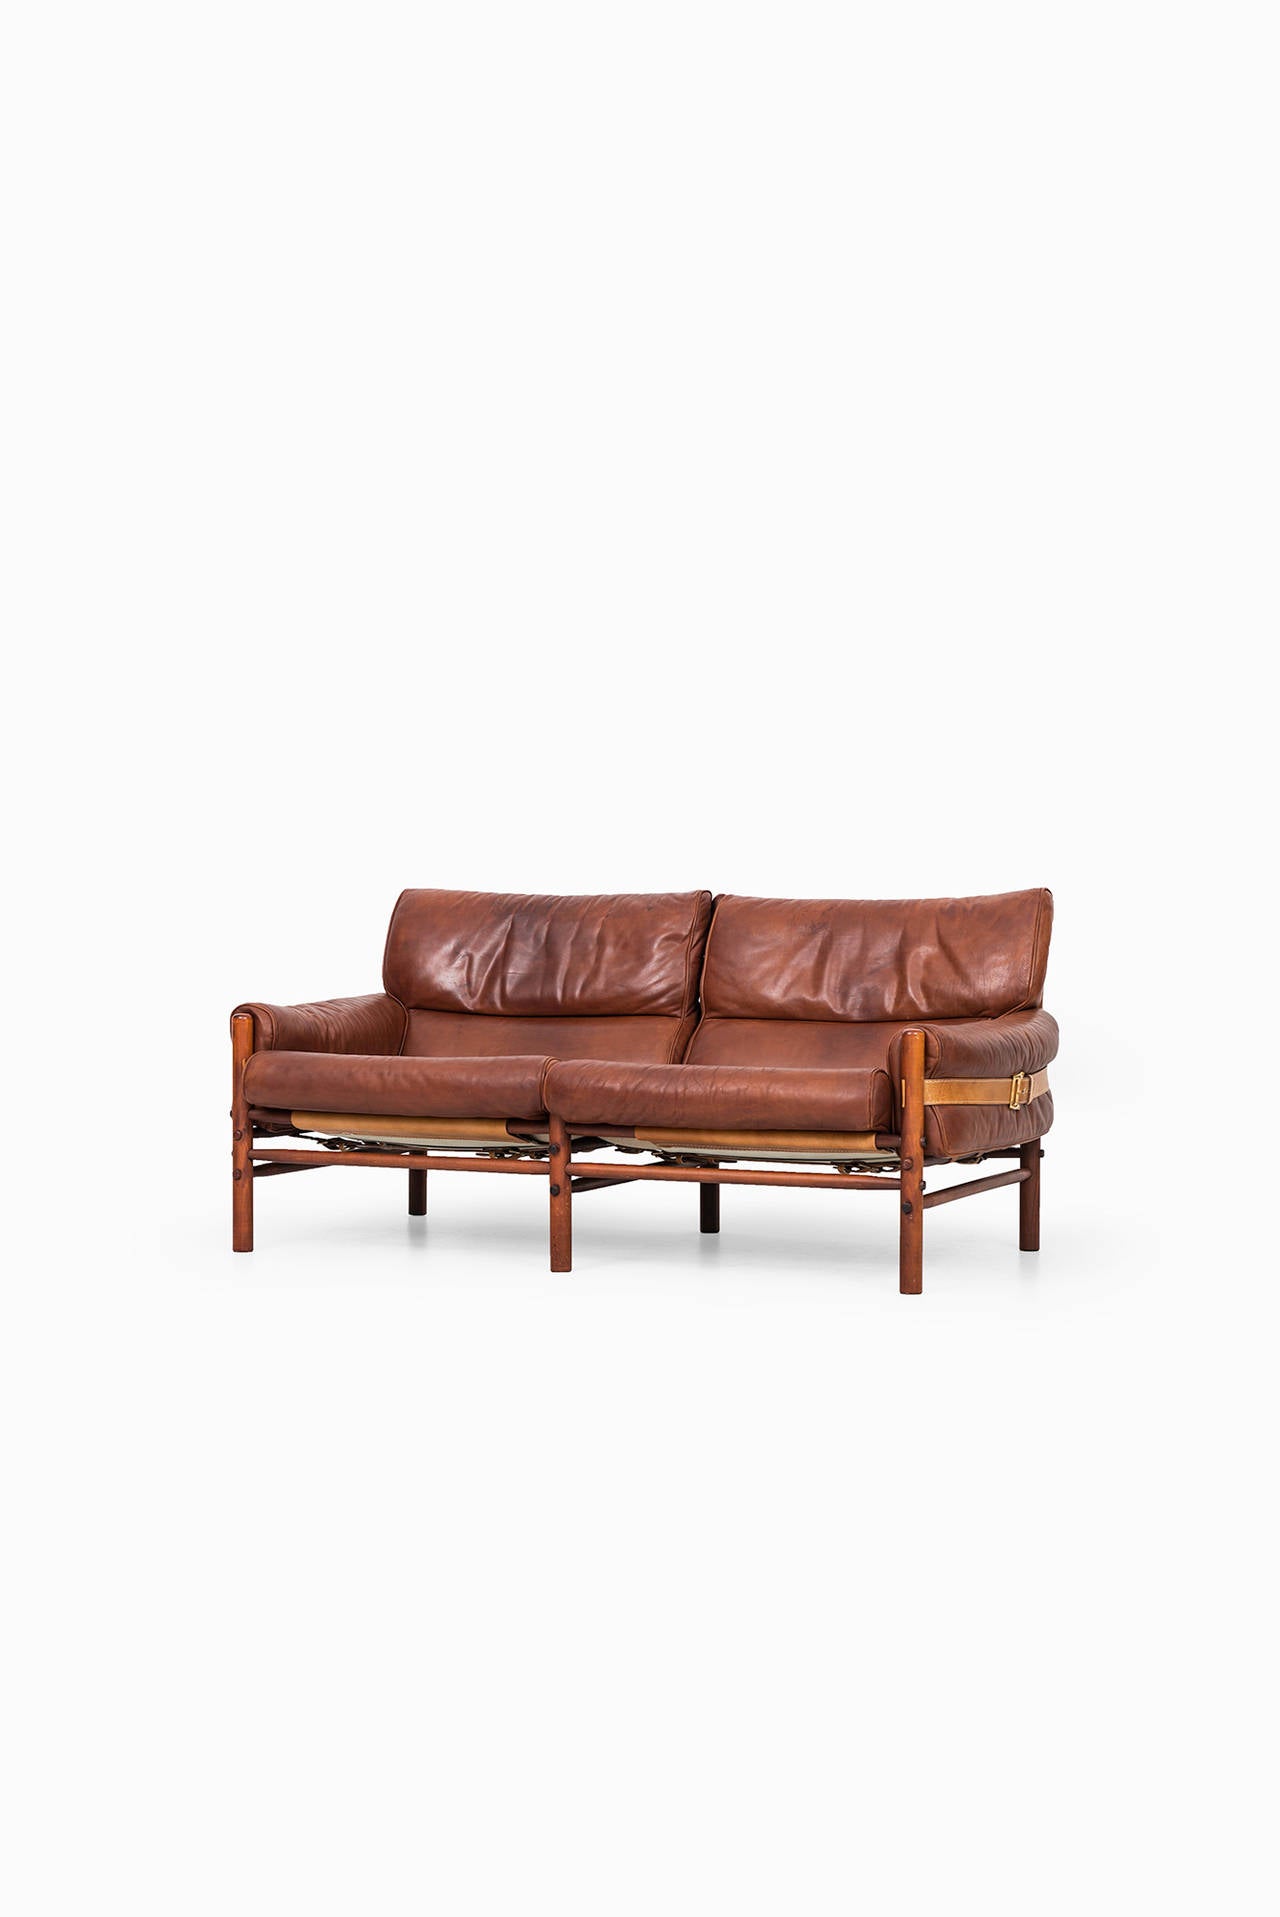 Two-seat sofa model Kontiki designed by Arne Norell. Produced by Arne Norell AB in Aneby, Sweden.